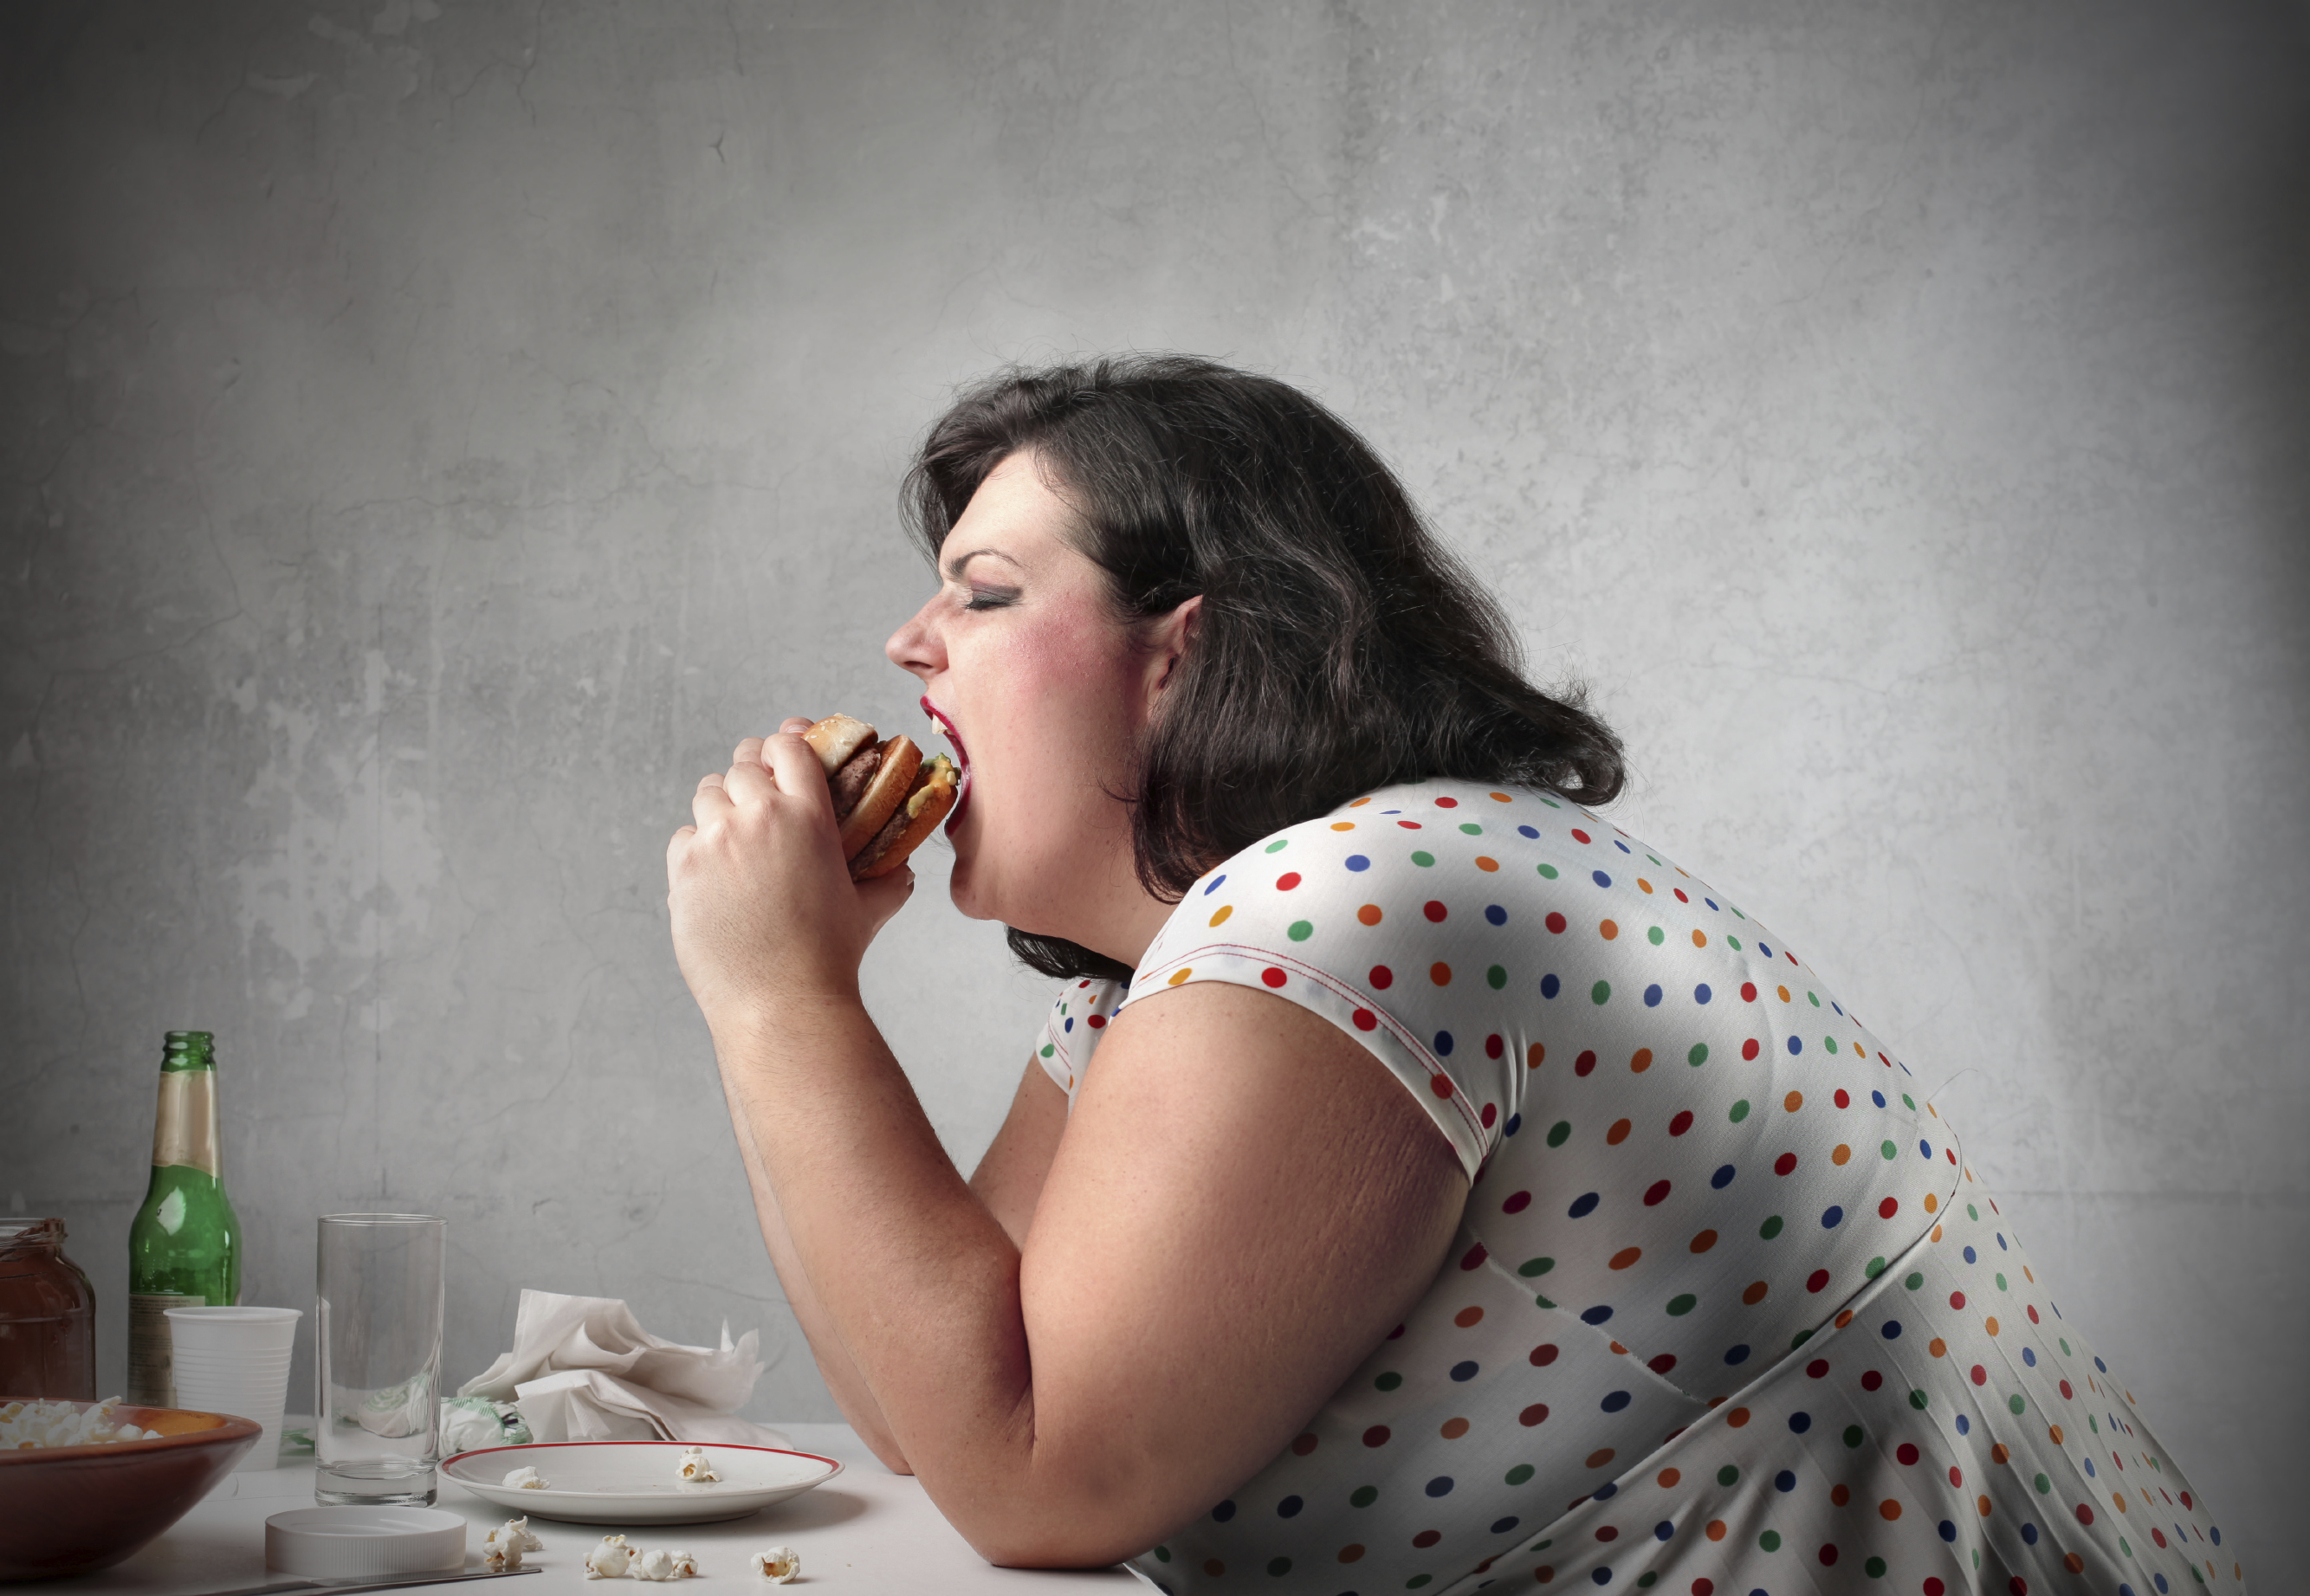 Could Dining With A Fat Friend Ruin Your Diet Cbs News